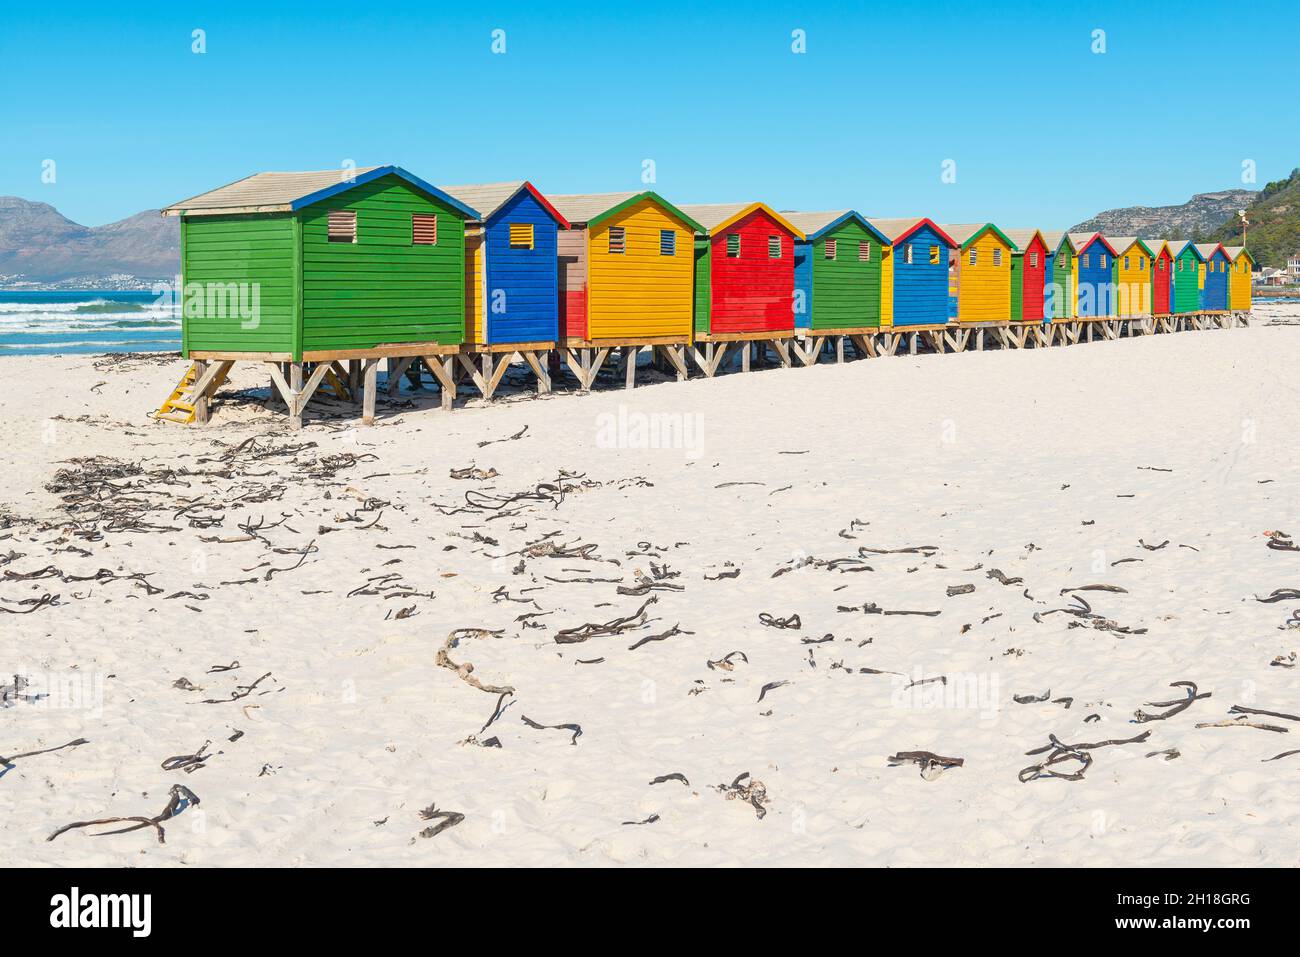 Colorful beach huts on Muizenberg beach near Cape Town, South Africa. Stock Photo